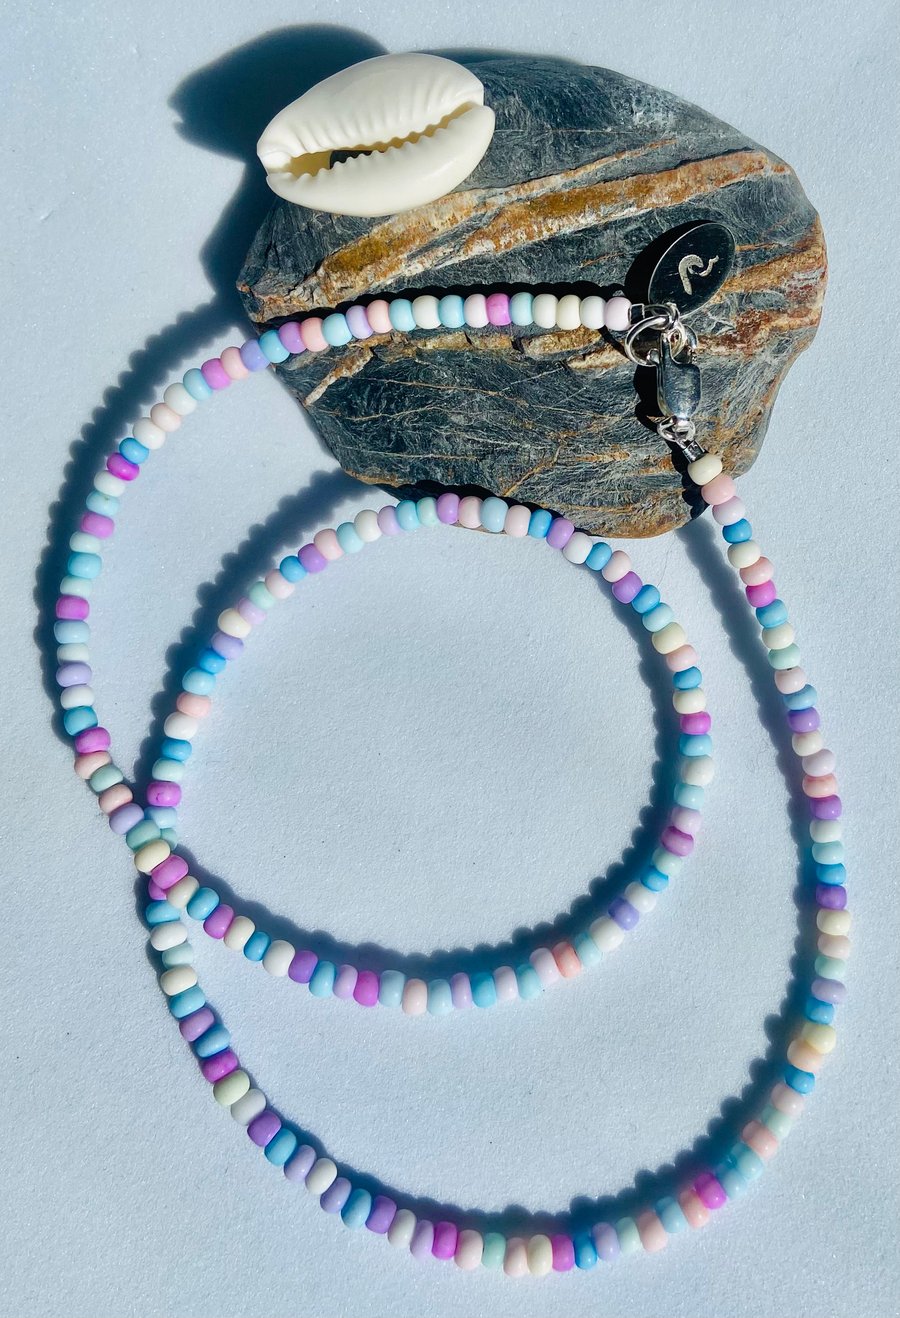 Pastel Rainbow Czech Glass Seed-Bead Necklace with Sterling Silver Detail